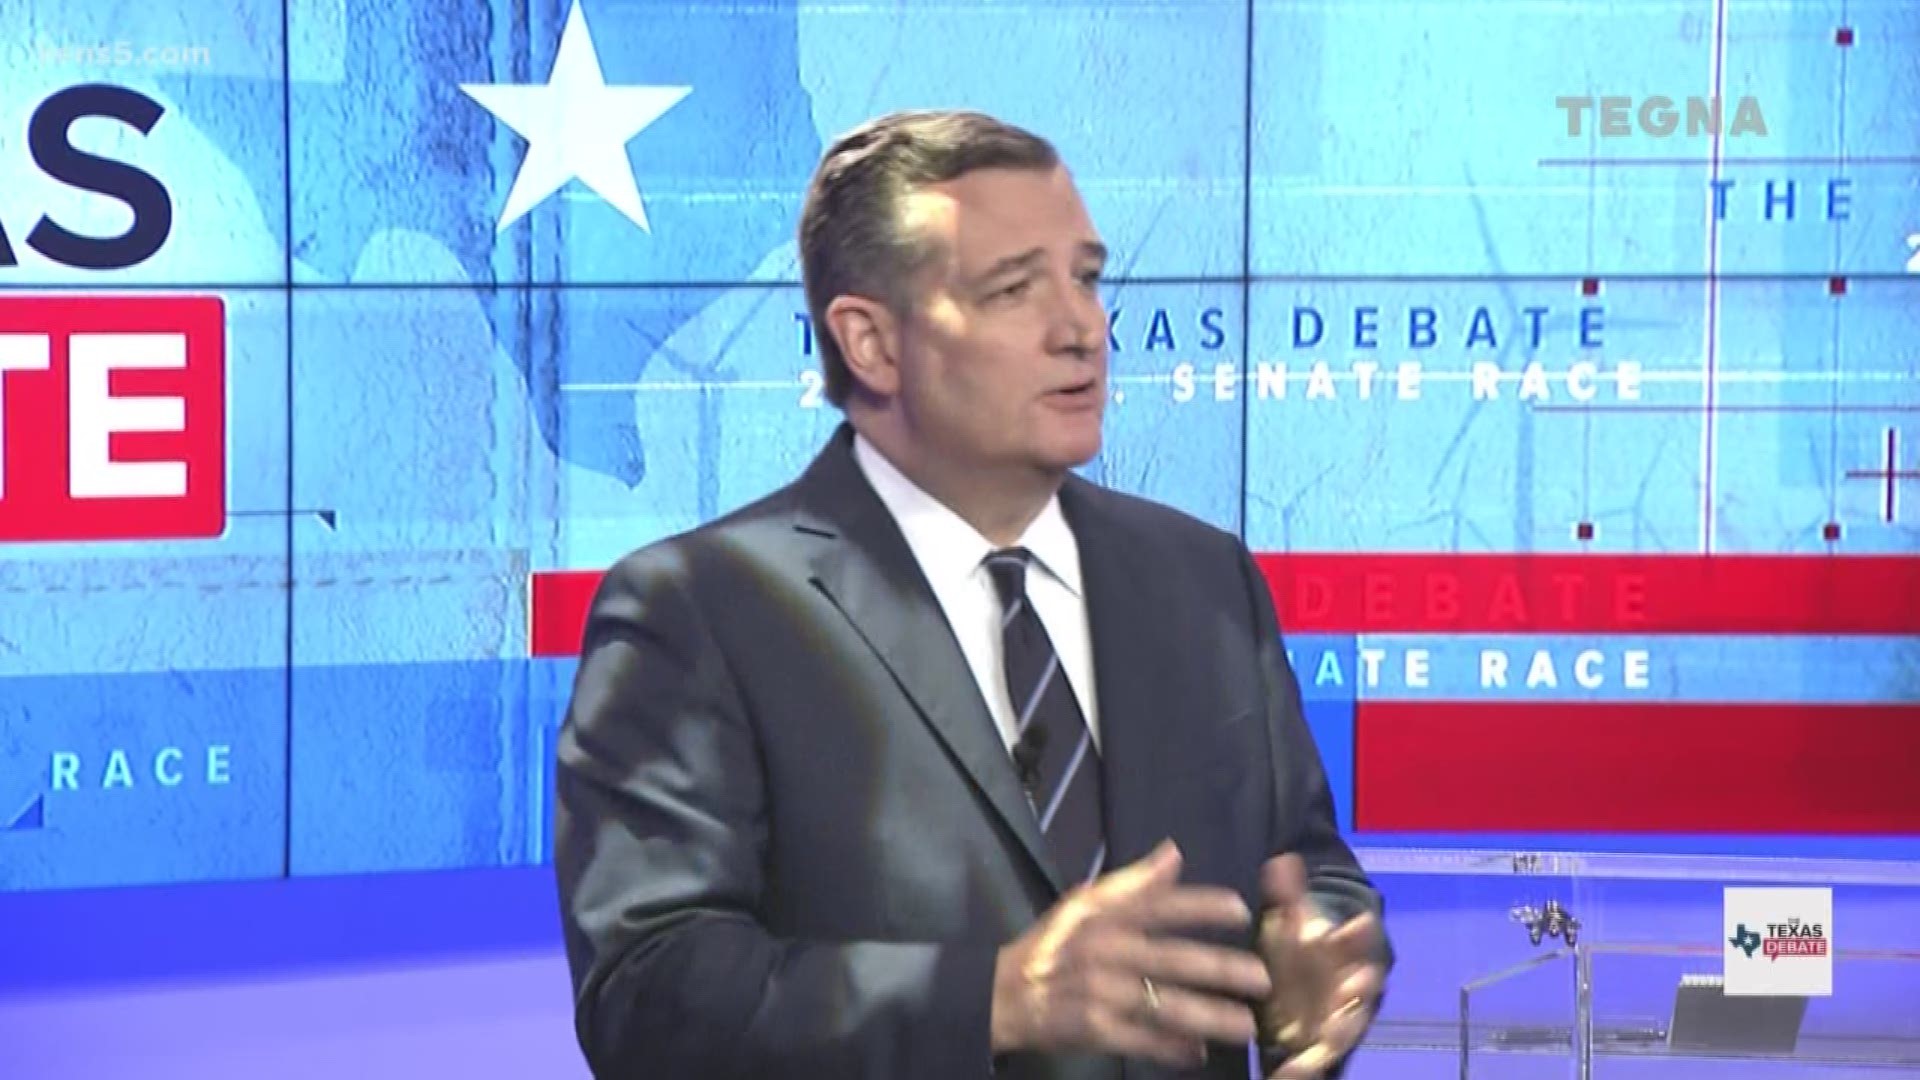 In his closing statements, Cruz says he and O'Rourke could not be more different. Cruz said he wants to cut taxes and repeal Obamacare.